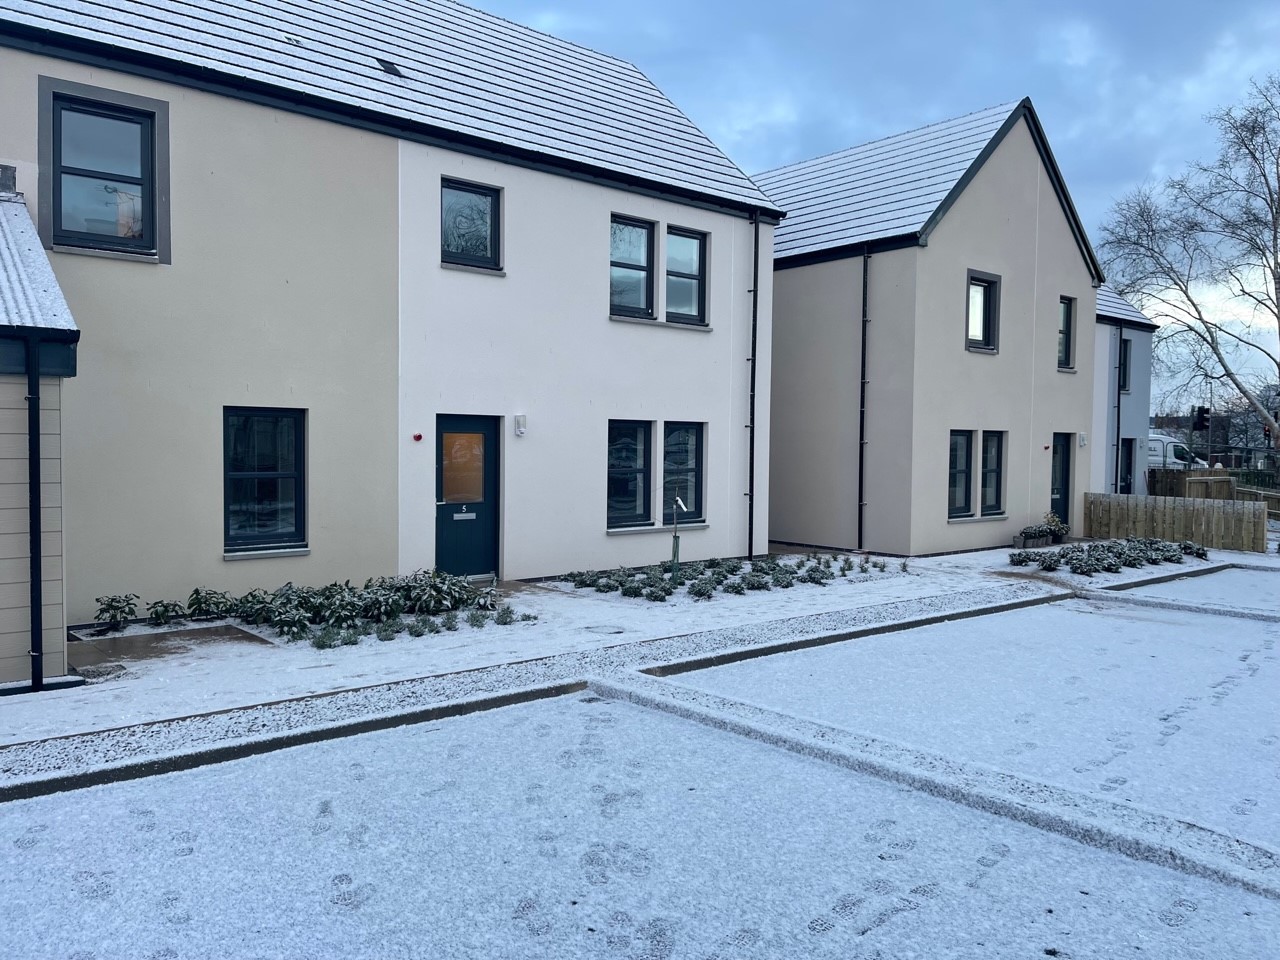 Highland Council’s milestone housing rebuild completes in Dingwall